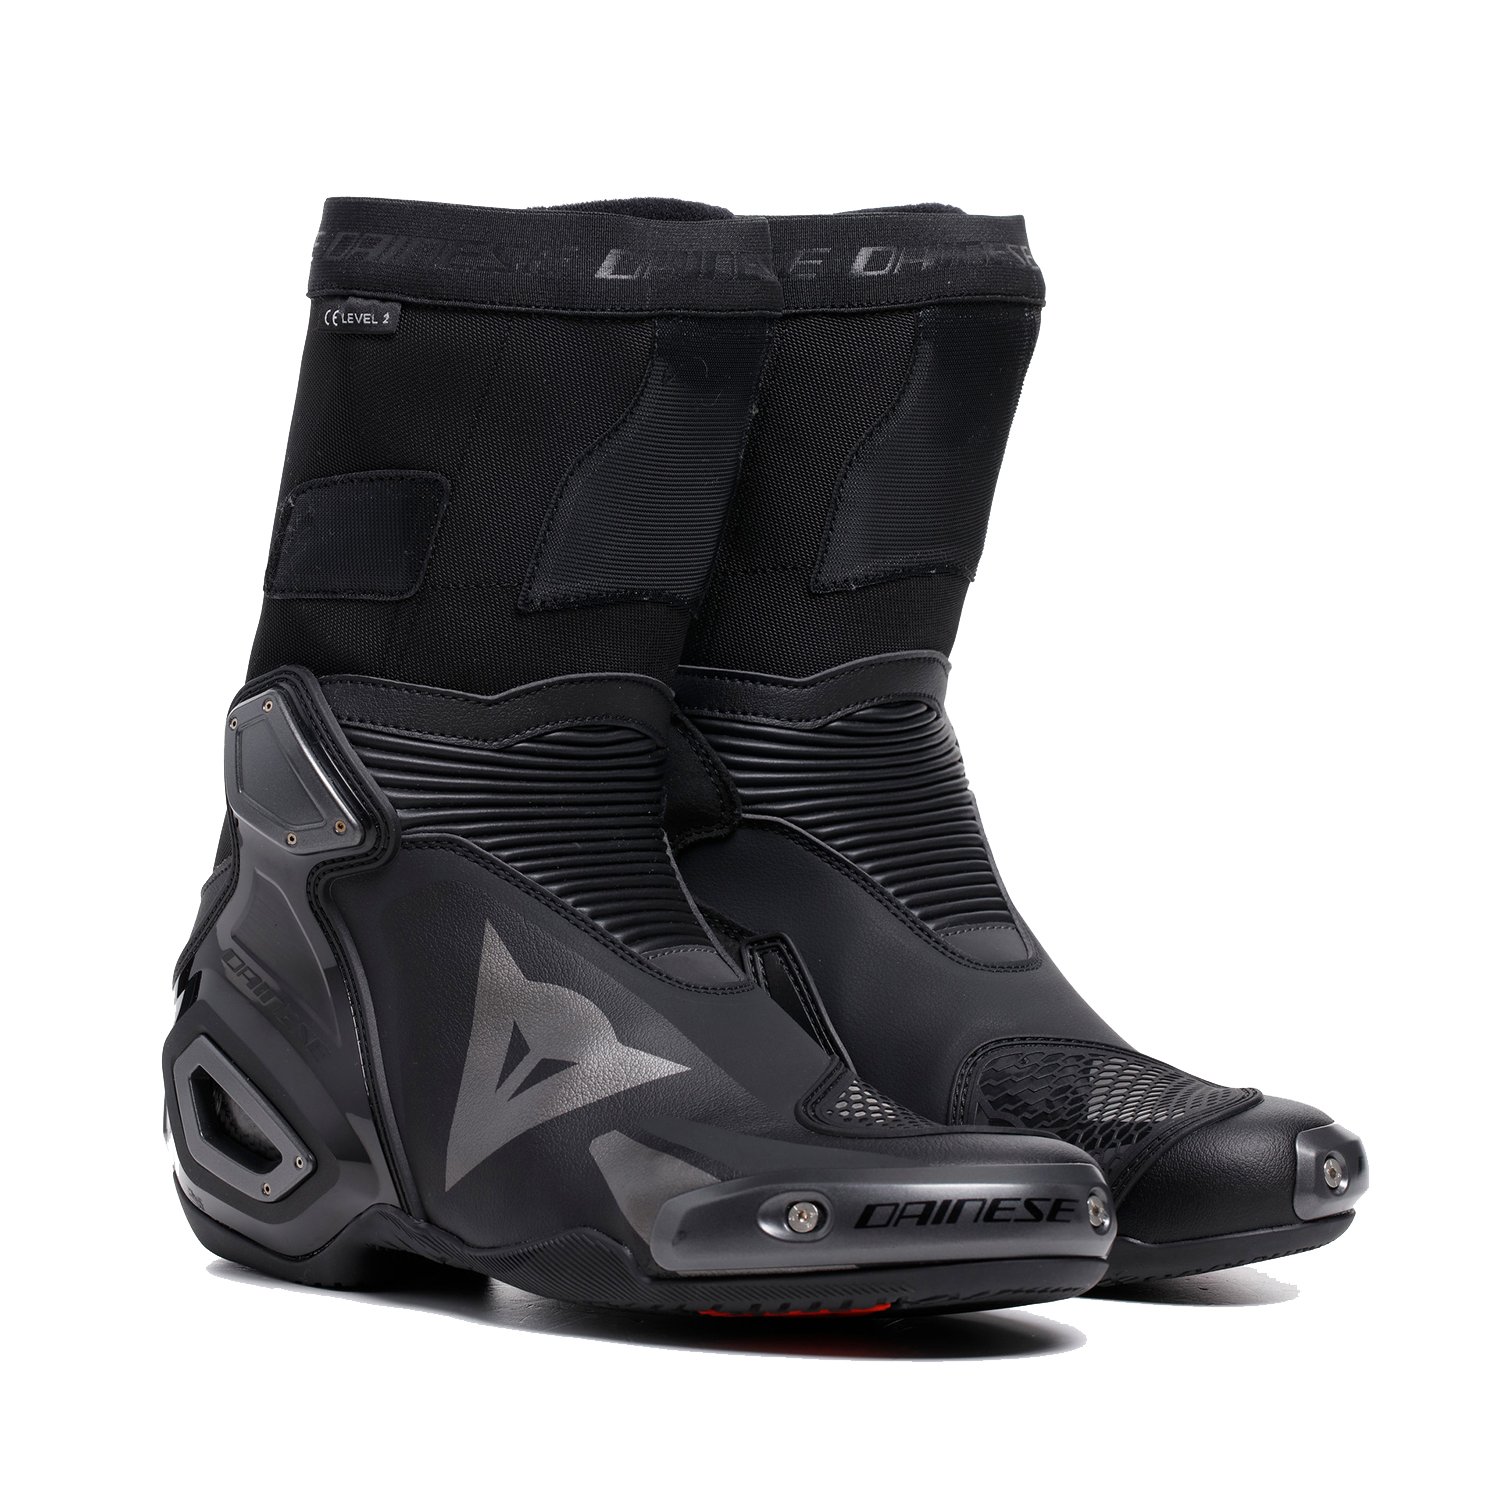 Image of Dainese Axial 2 Boots Black Size 40 ID 8051019739636